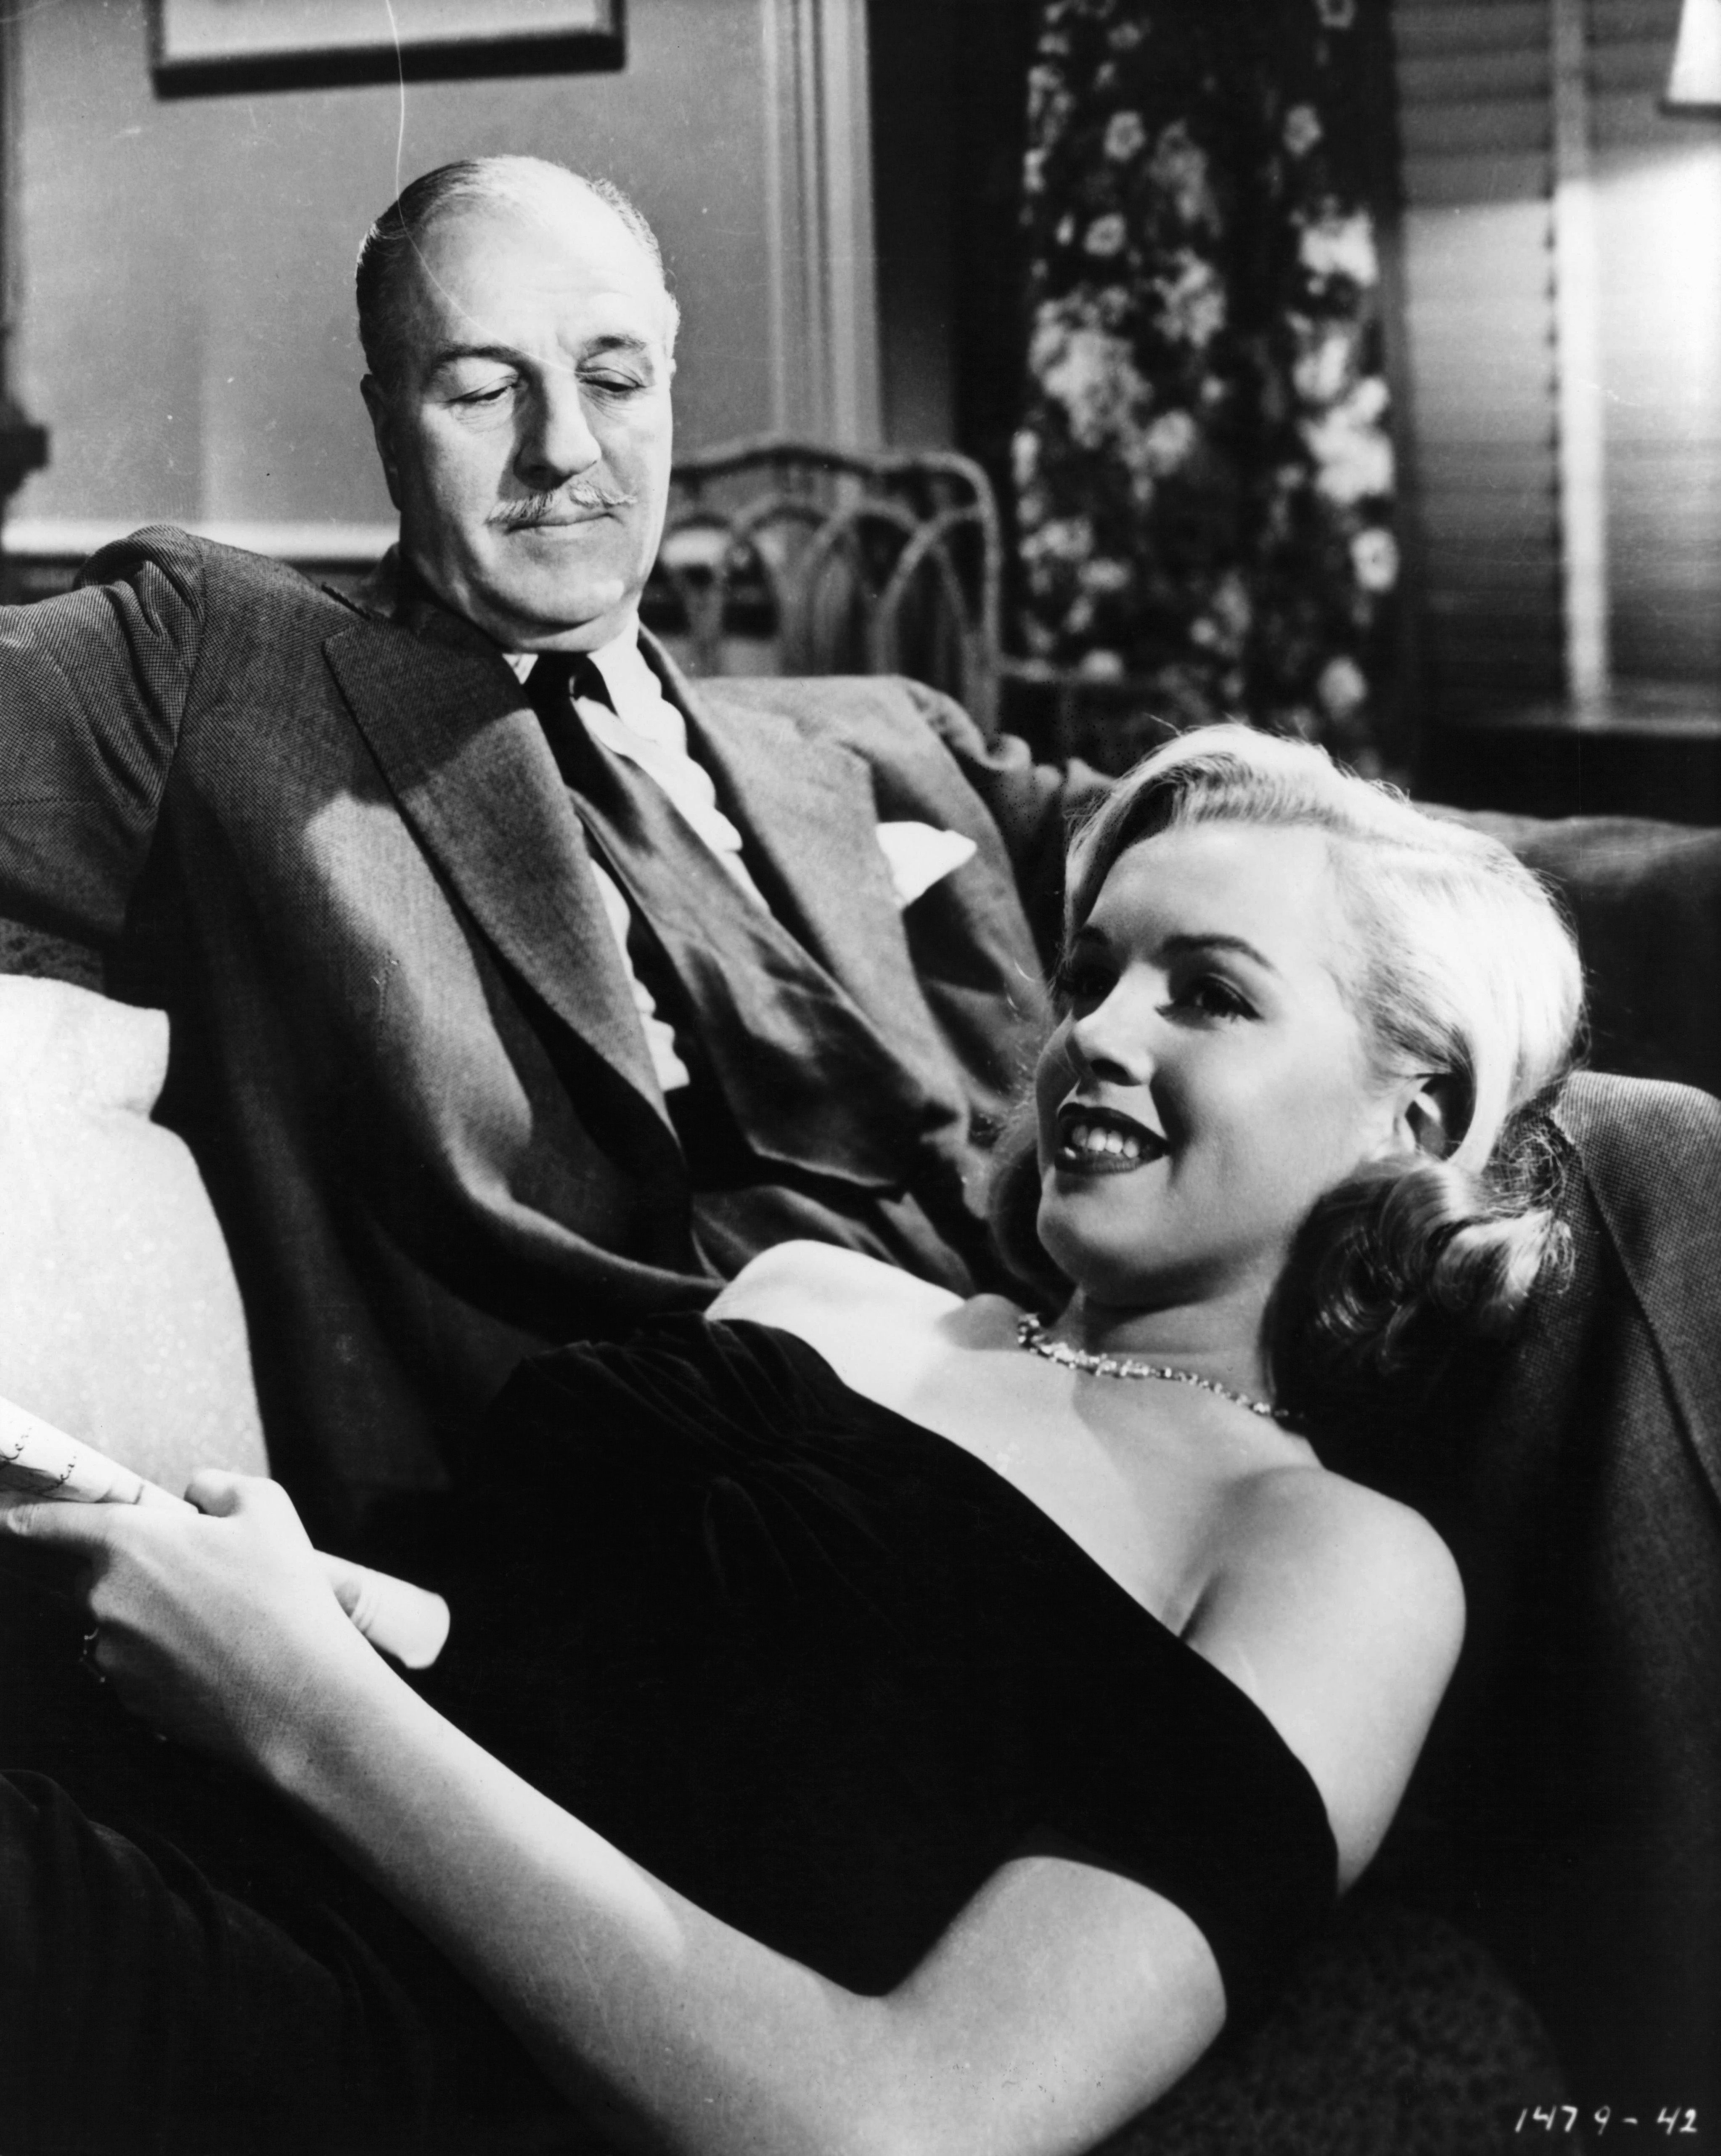 The most memorable Marilyn Monroe movie roles